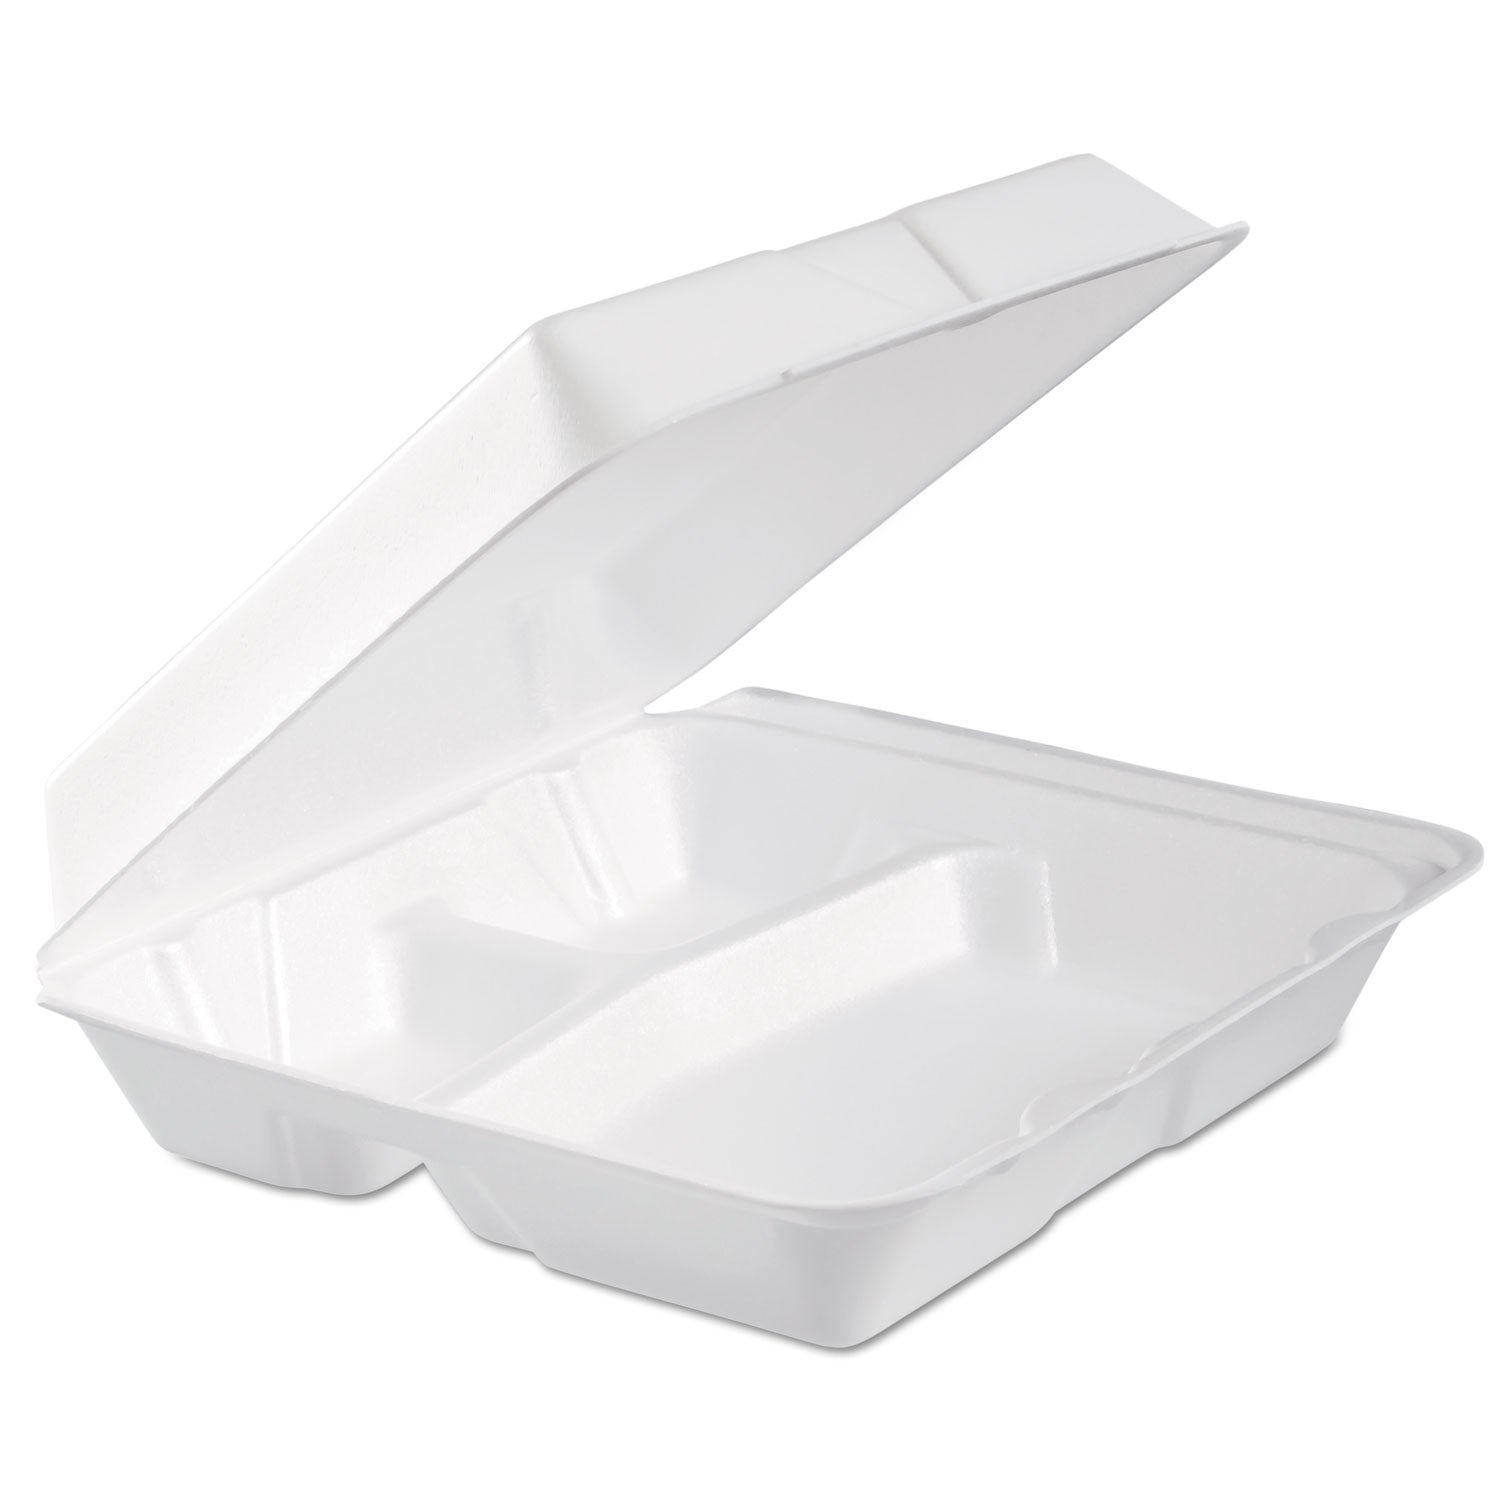 Foam Hinged Lid Container, 3-Compartment, 9.3 x 9.5 x 3, White, 100/Bag, 2 Bag/Carton - 